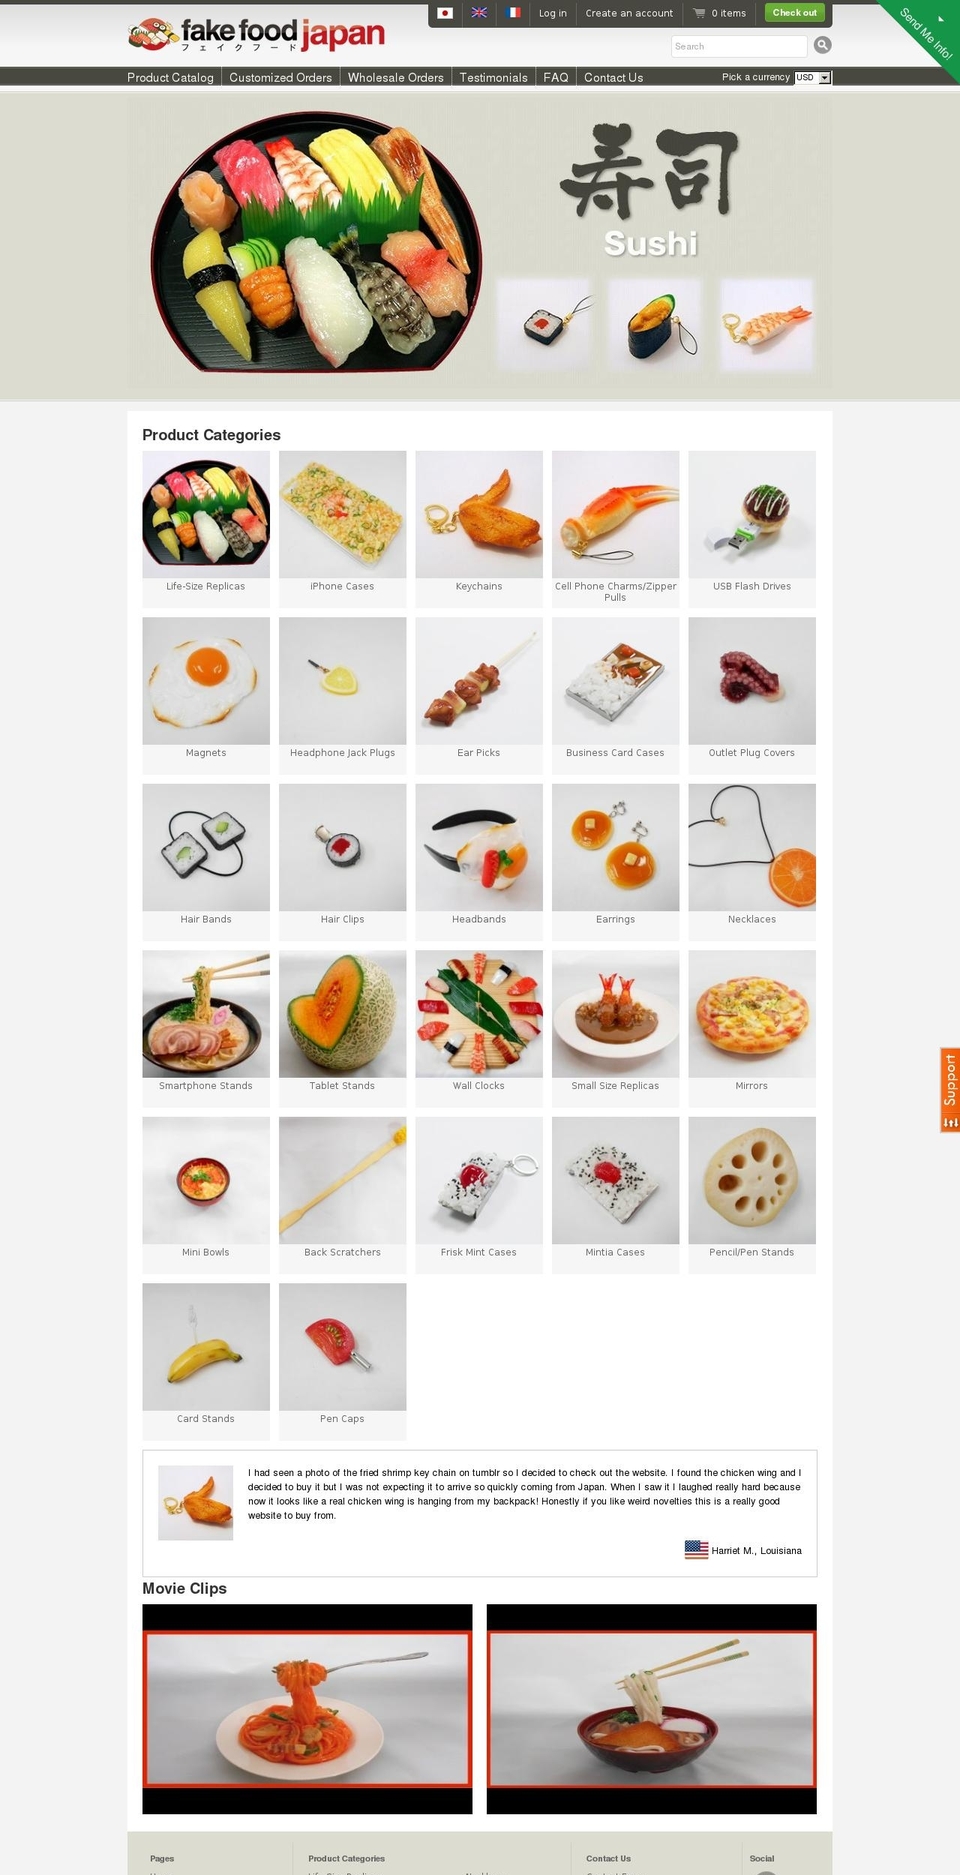 Radiance Shopify theme site example fakefoodjapan.com